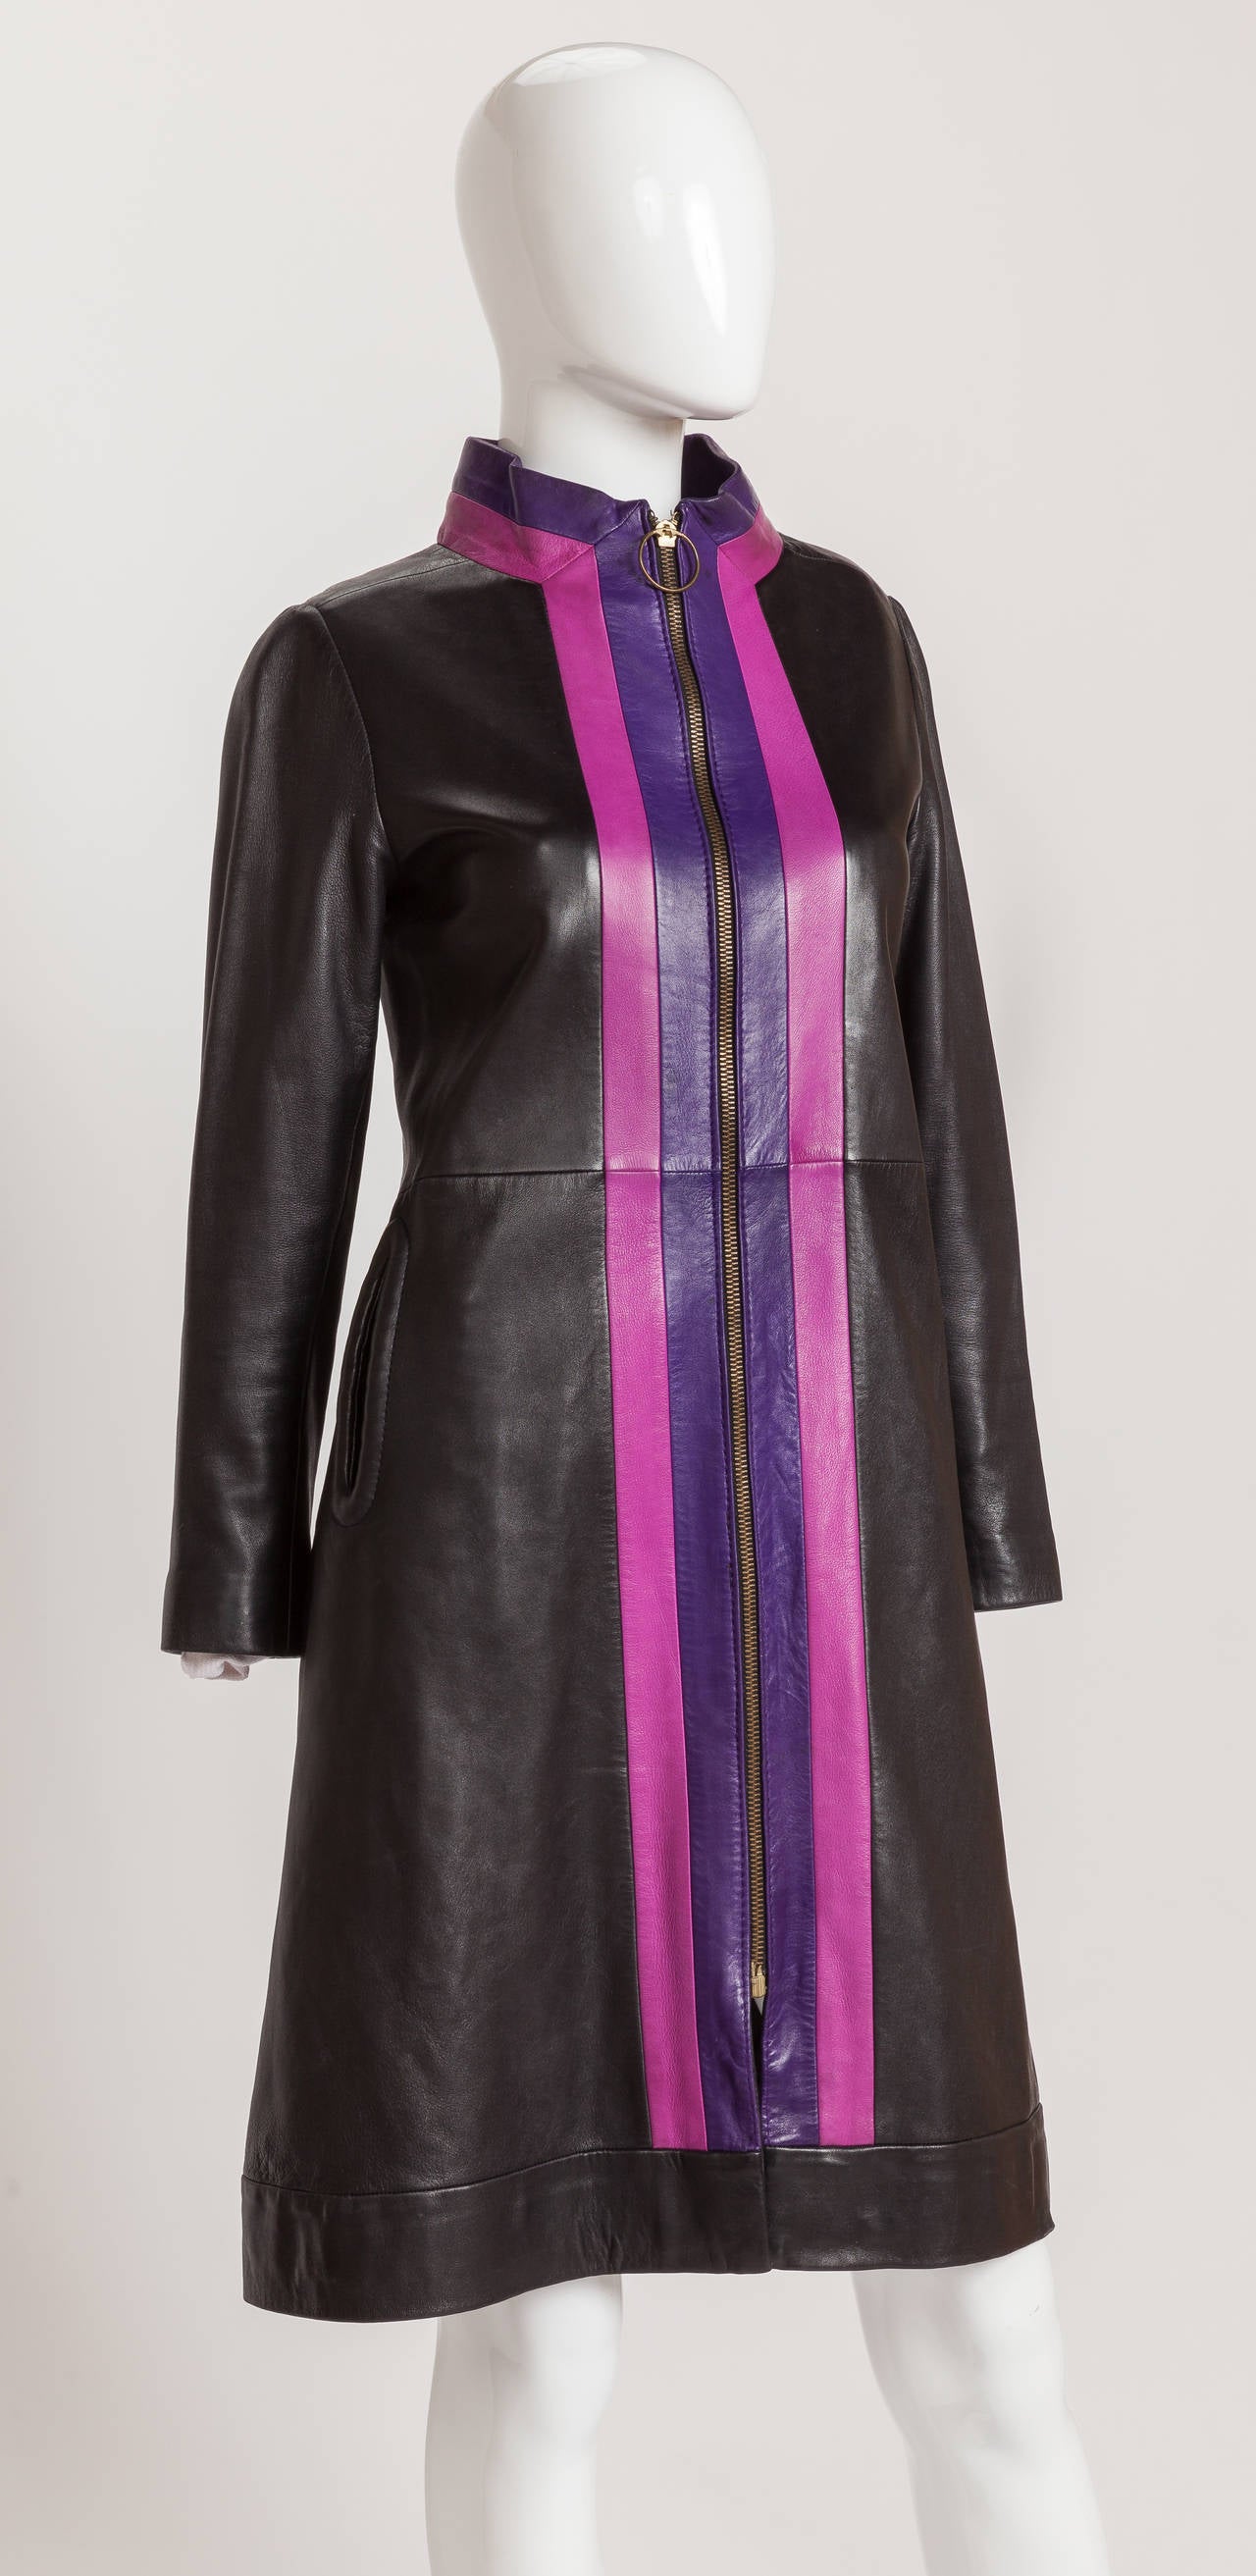 Simply put - this is a killer coat and one of my all-time favorite Pierre Cardin garments. This 1970s body hugging knee-length coat is made from supple, soft black leather and is trimmed with purple and fuchsia pink leather stripes down the center